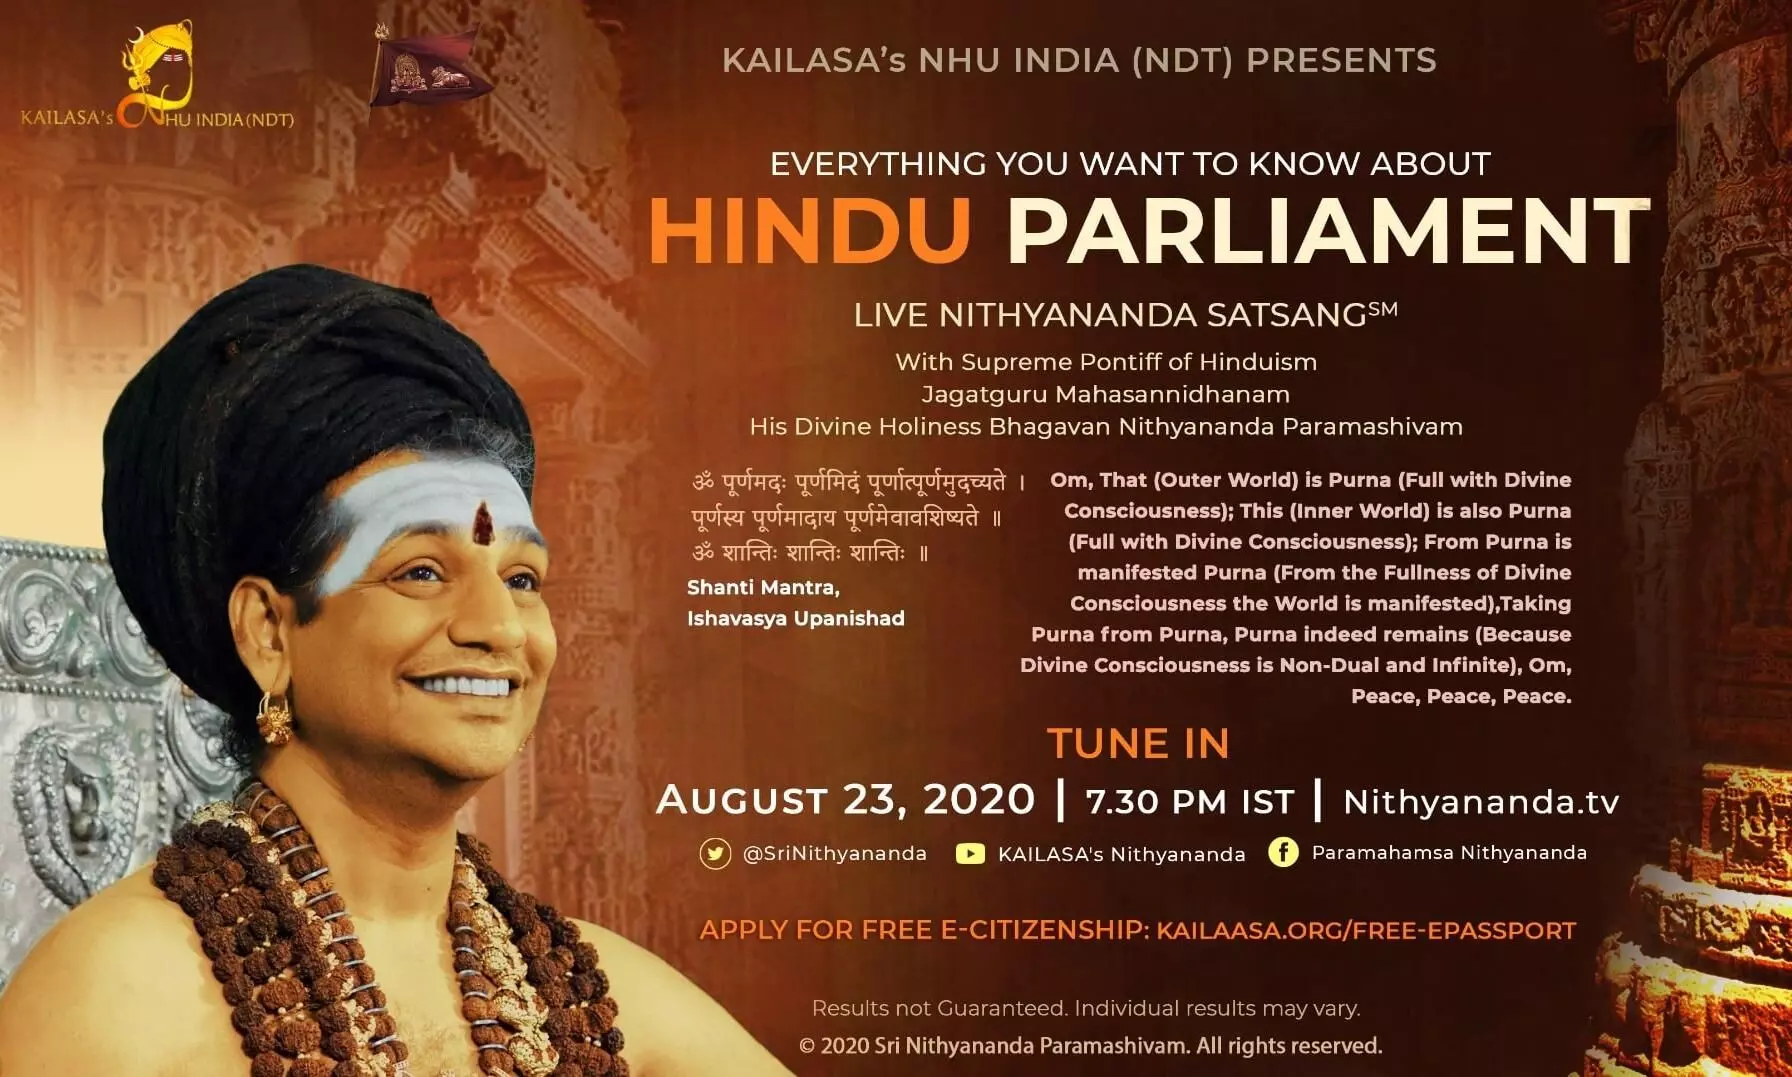 After Reserve Bank of Kailaasa, absconding Godman Nithyananda comes up with a Hindu parliament